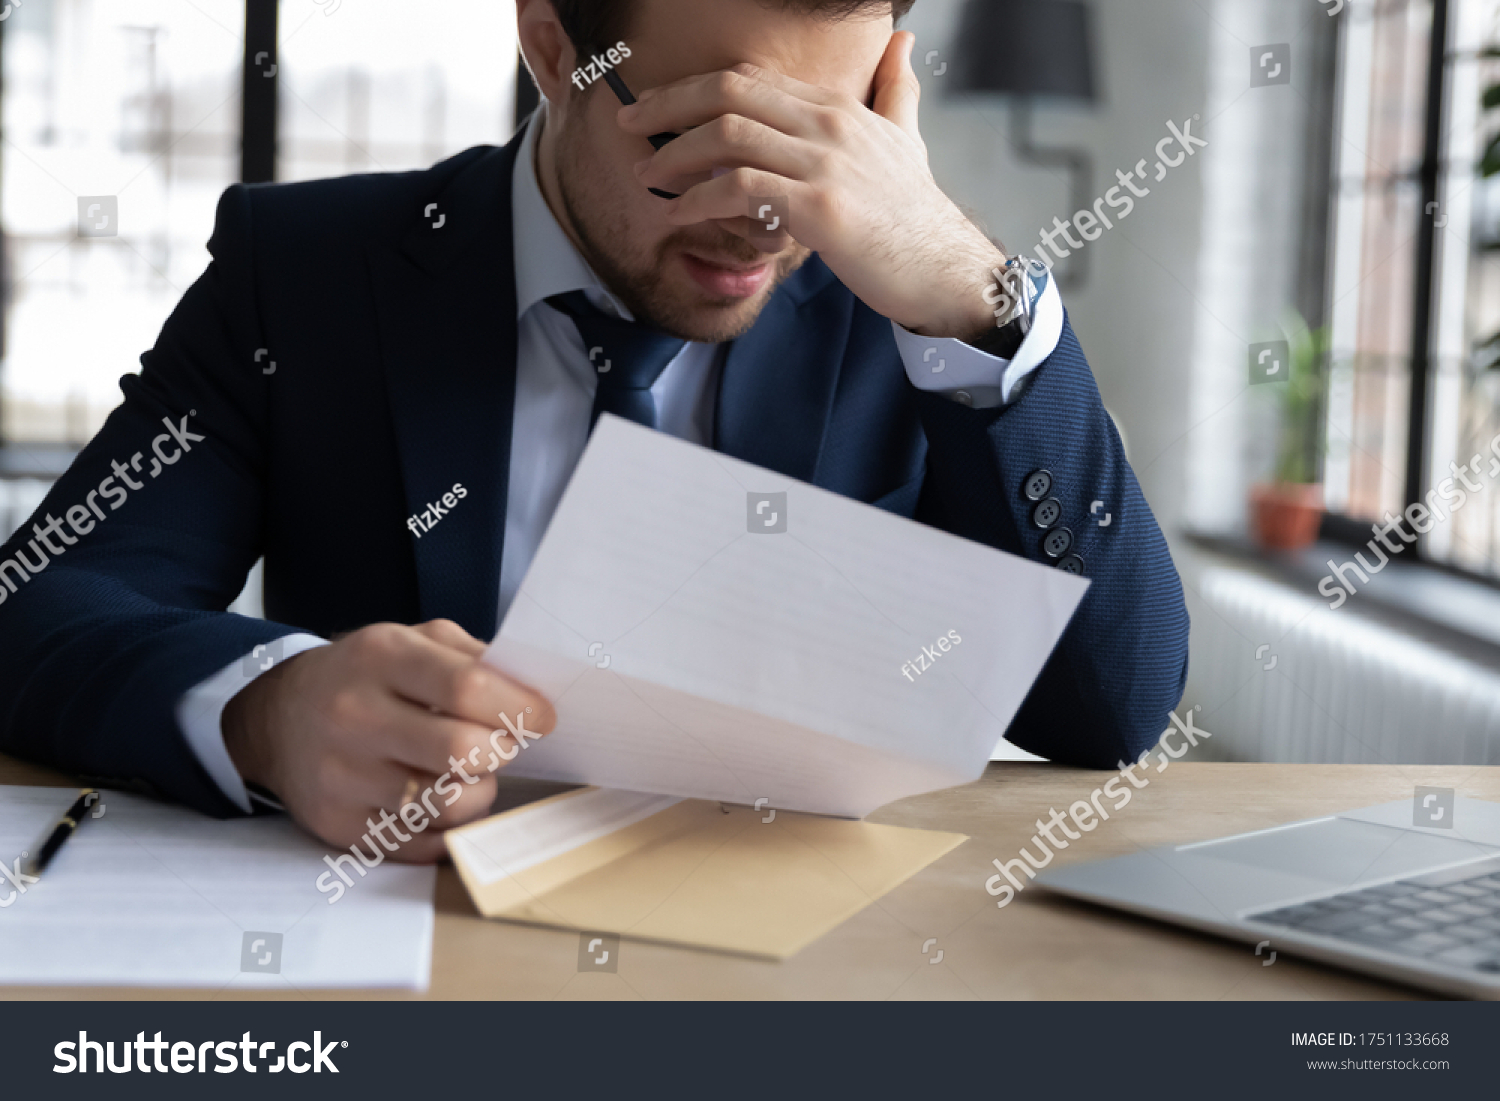 Upset male employer or boss sit at desk feel distressed disappointed reading post paper correspondence, unhappy employee frustrated by postal paperwork, get dismissal notice, fired, failure concept #1751133668